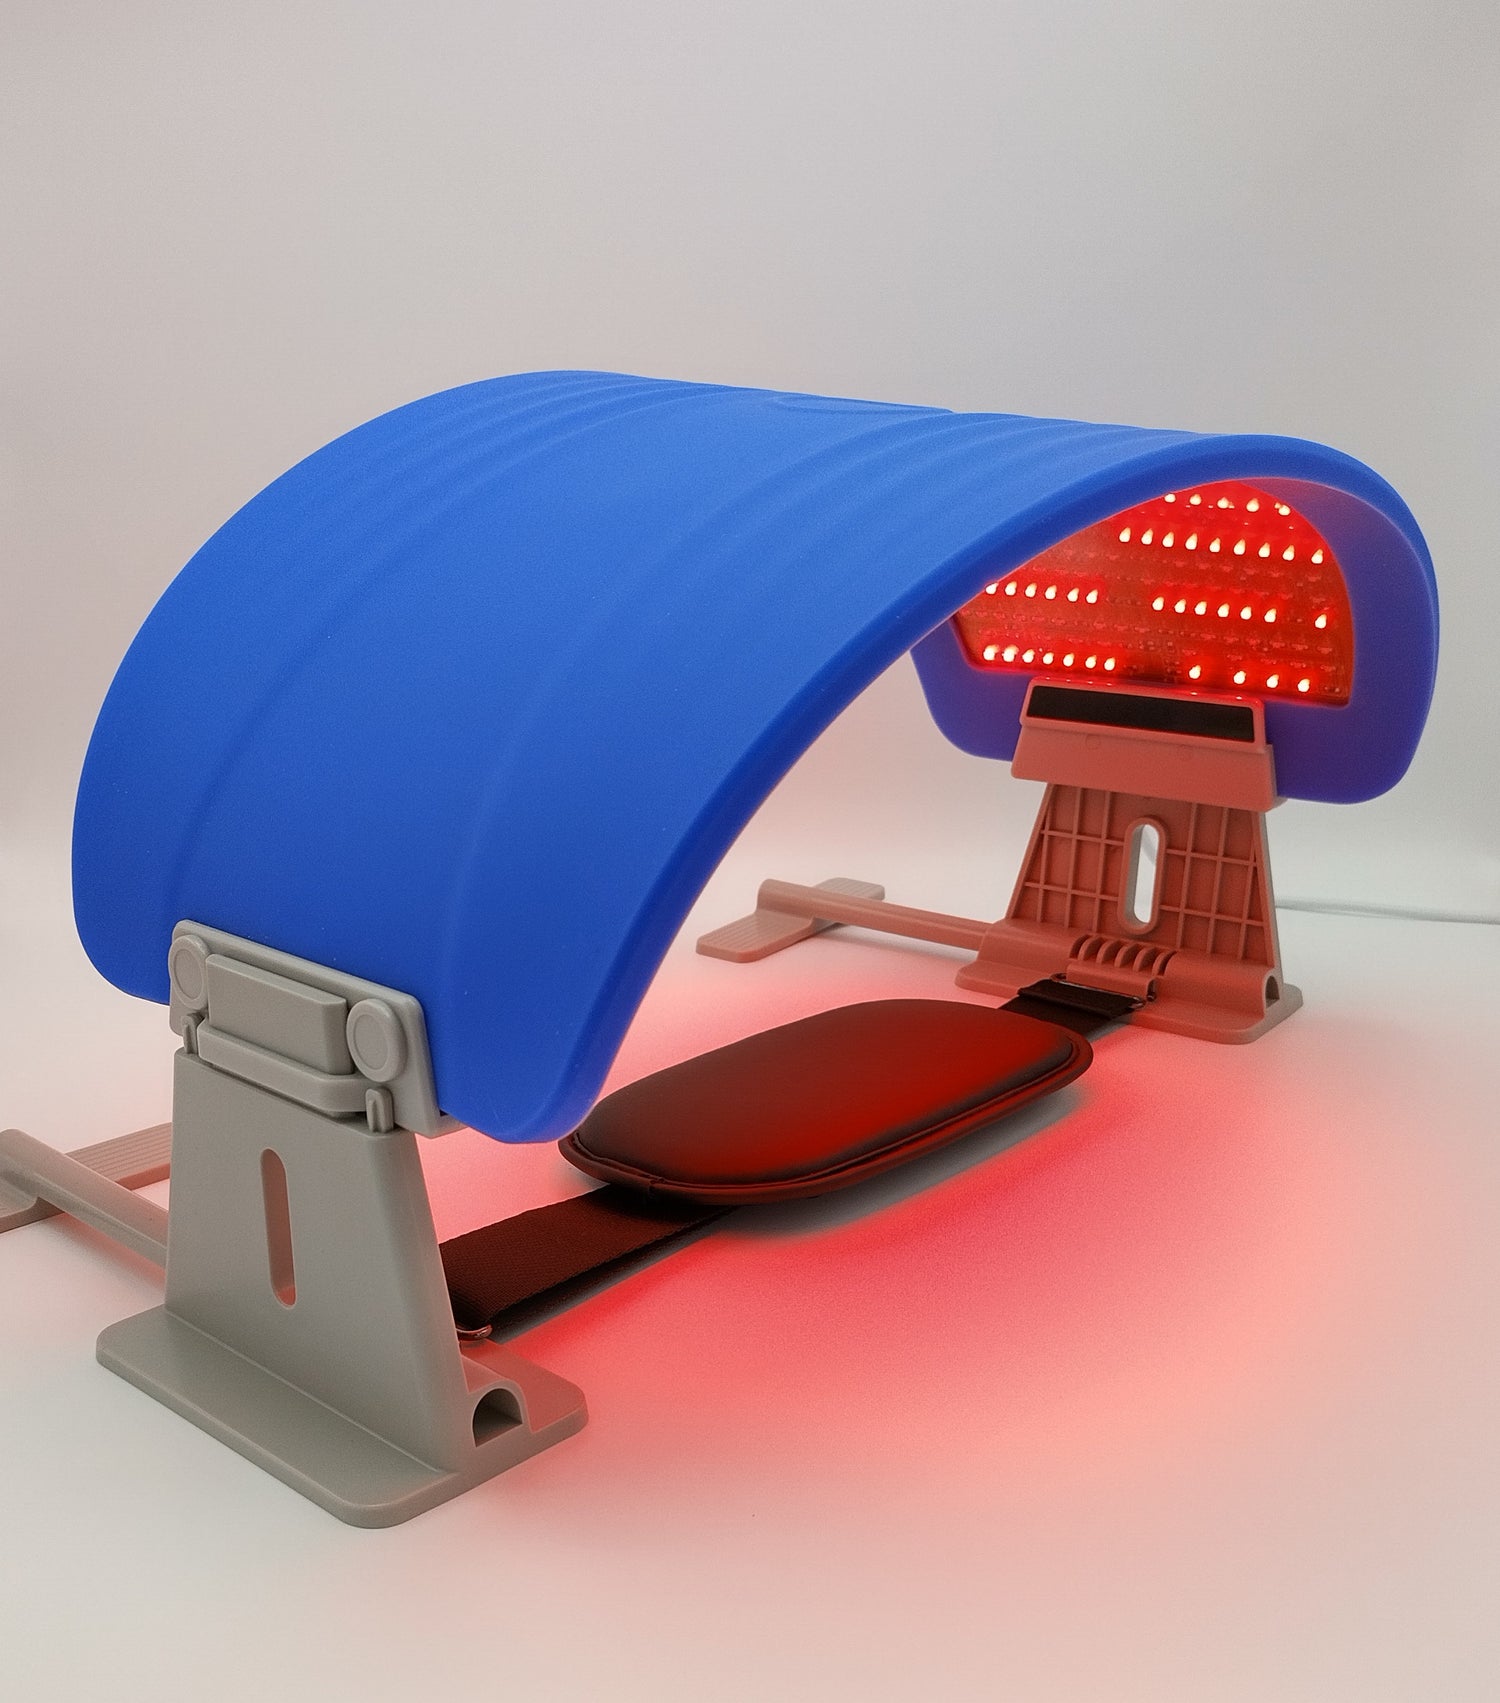 Three color (red, yellow, blue) light therapy device to reduce wrinkles, combat acne, and reduce redness from rosacea.